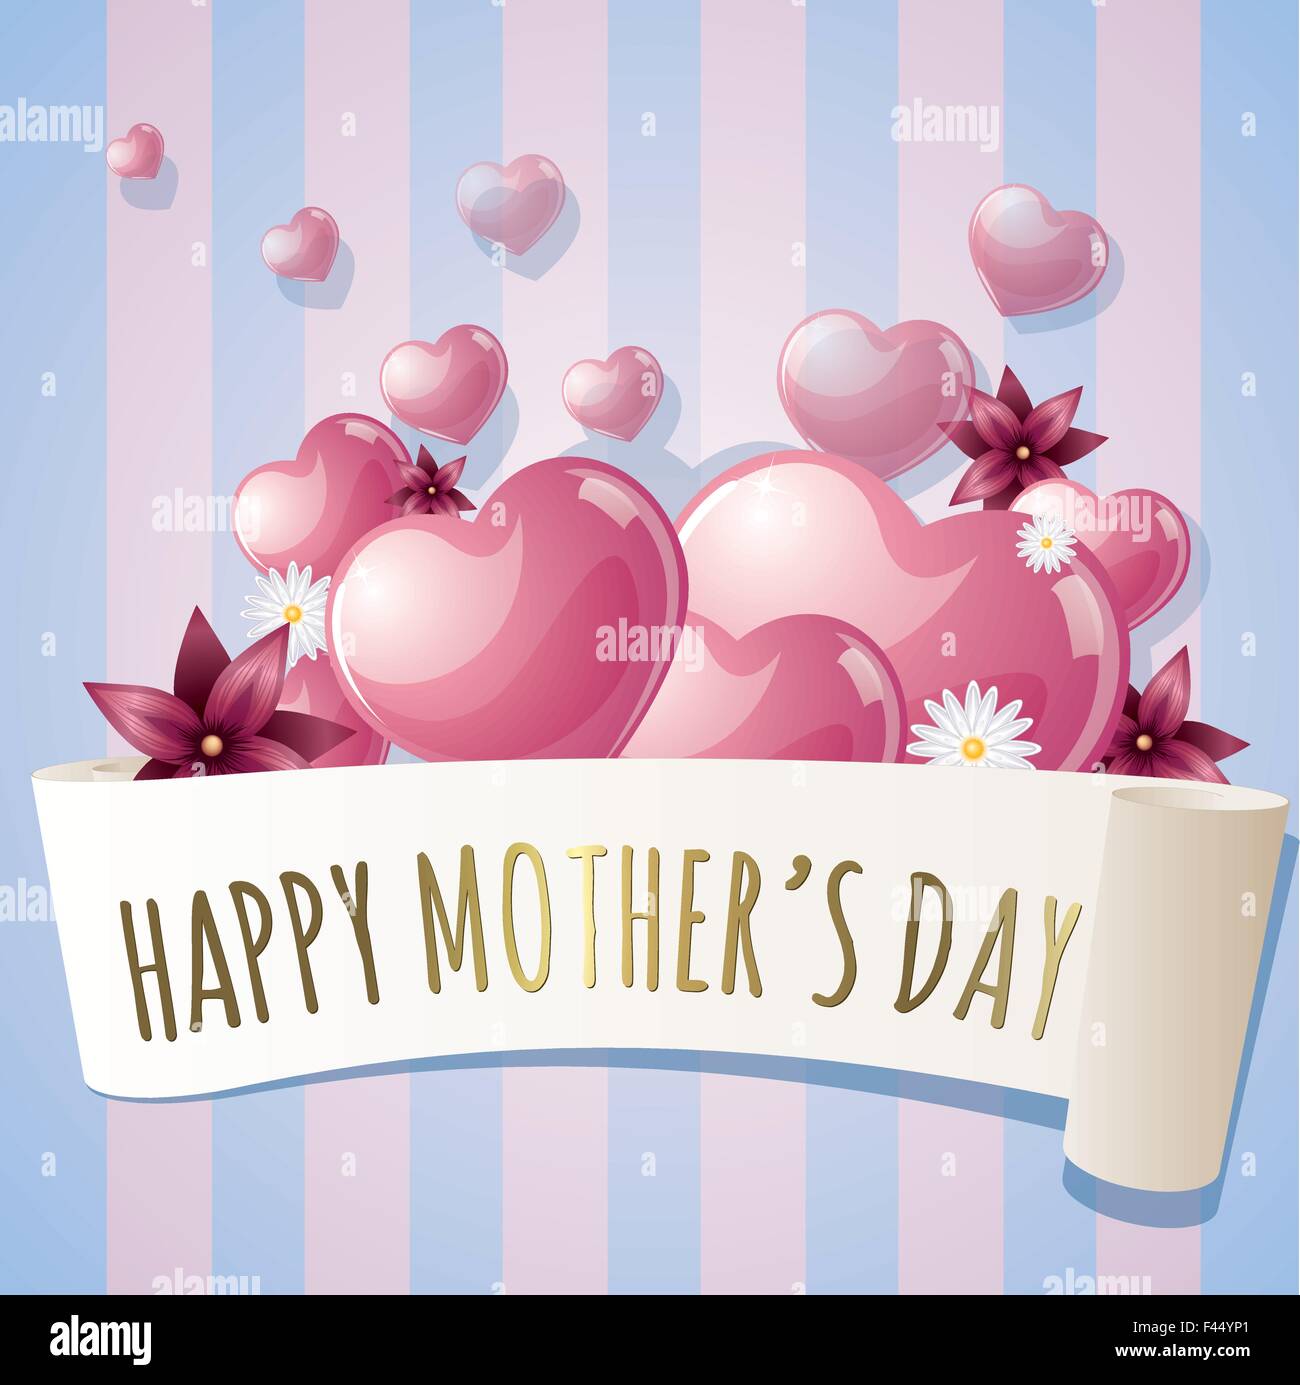 Happy mother's day card Stock Vector